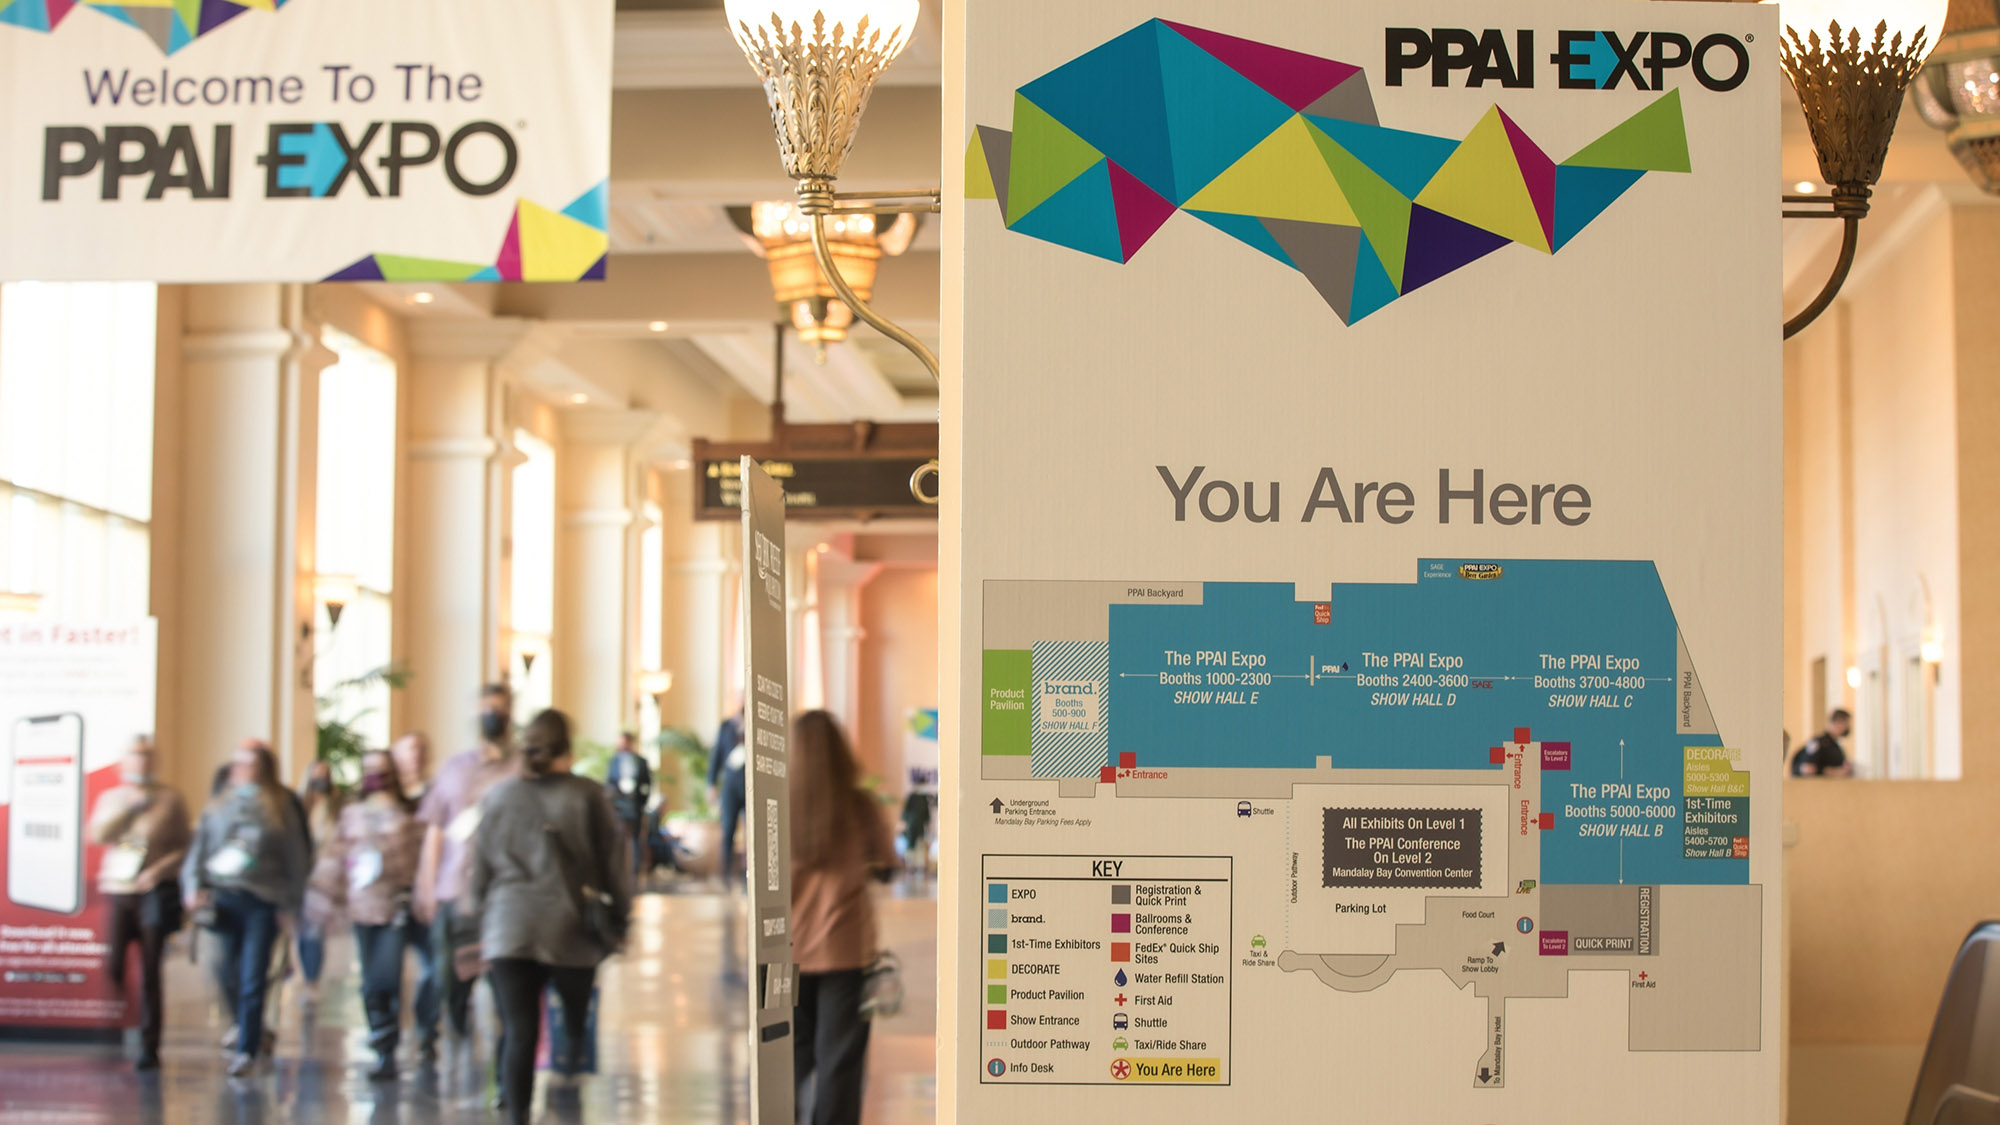 Prime Real Estate: How to Select the Best Trade Show Booth Location